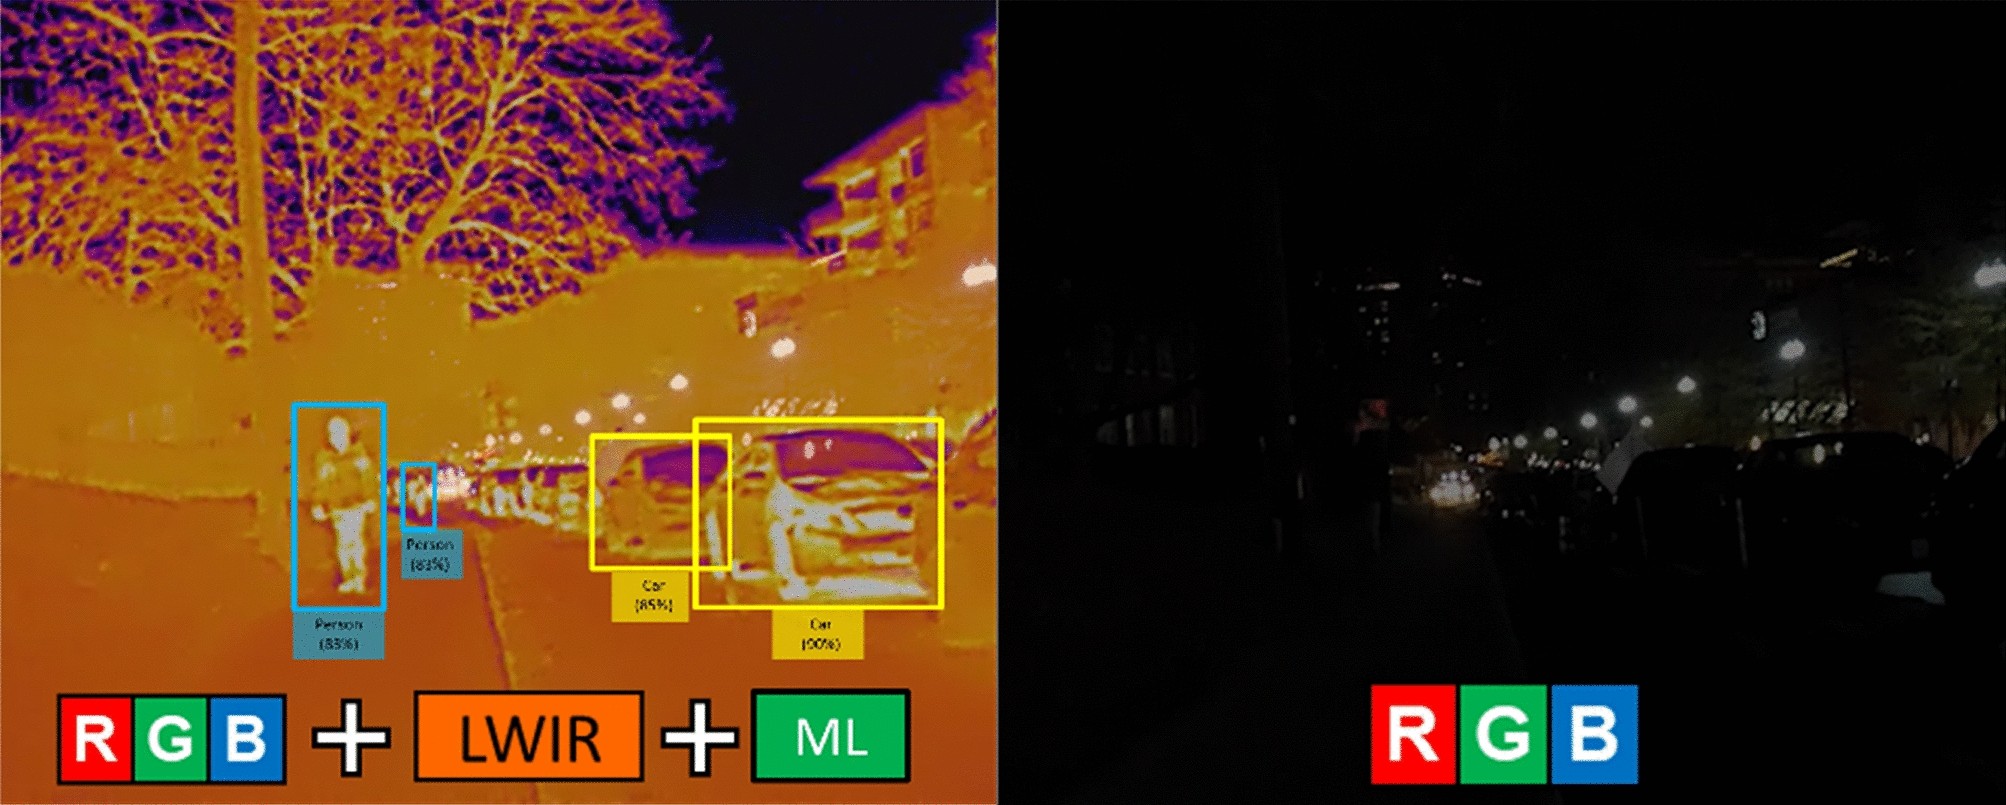 Sing Thermal Imagery Integration